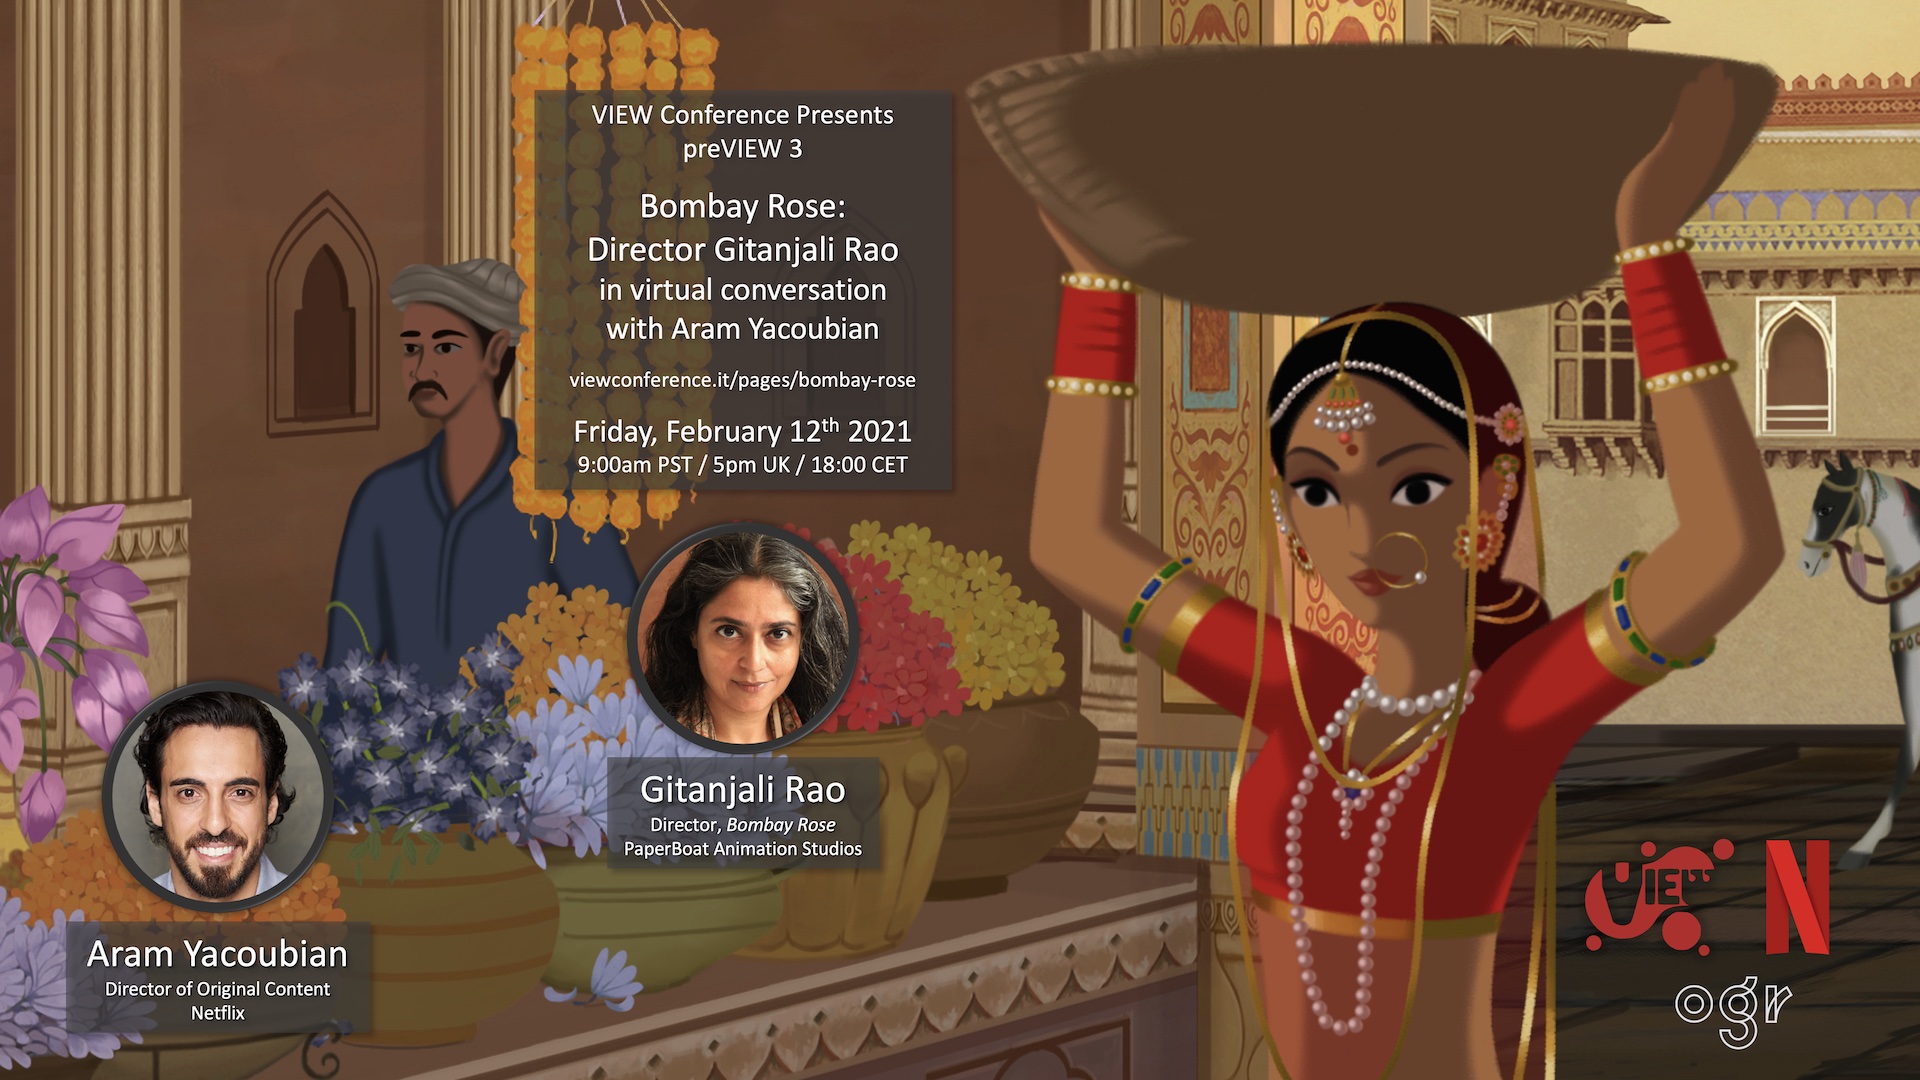 VIEW Conference announces “Bombay Rose” PreVIEW with Oscar-nominated director Gitanjali Rao in conversation with Netflix’s director of original content, Aram Yacoubian